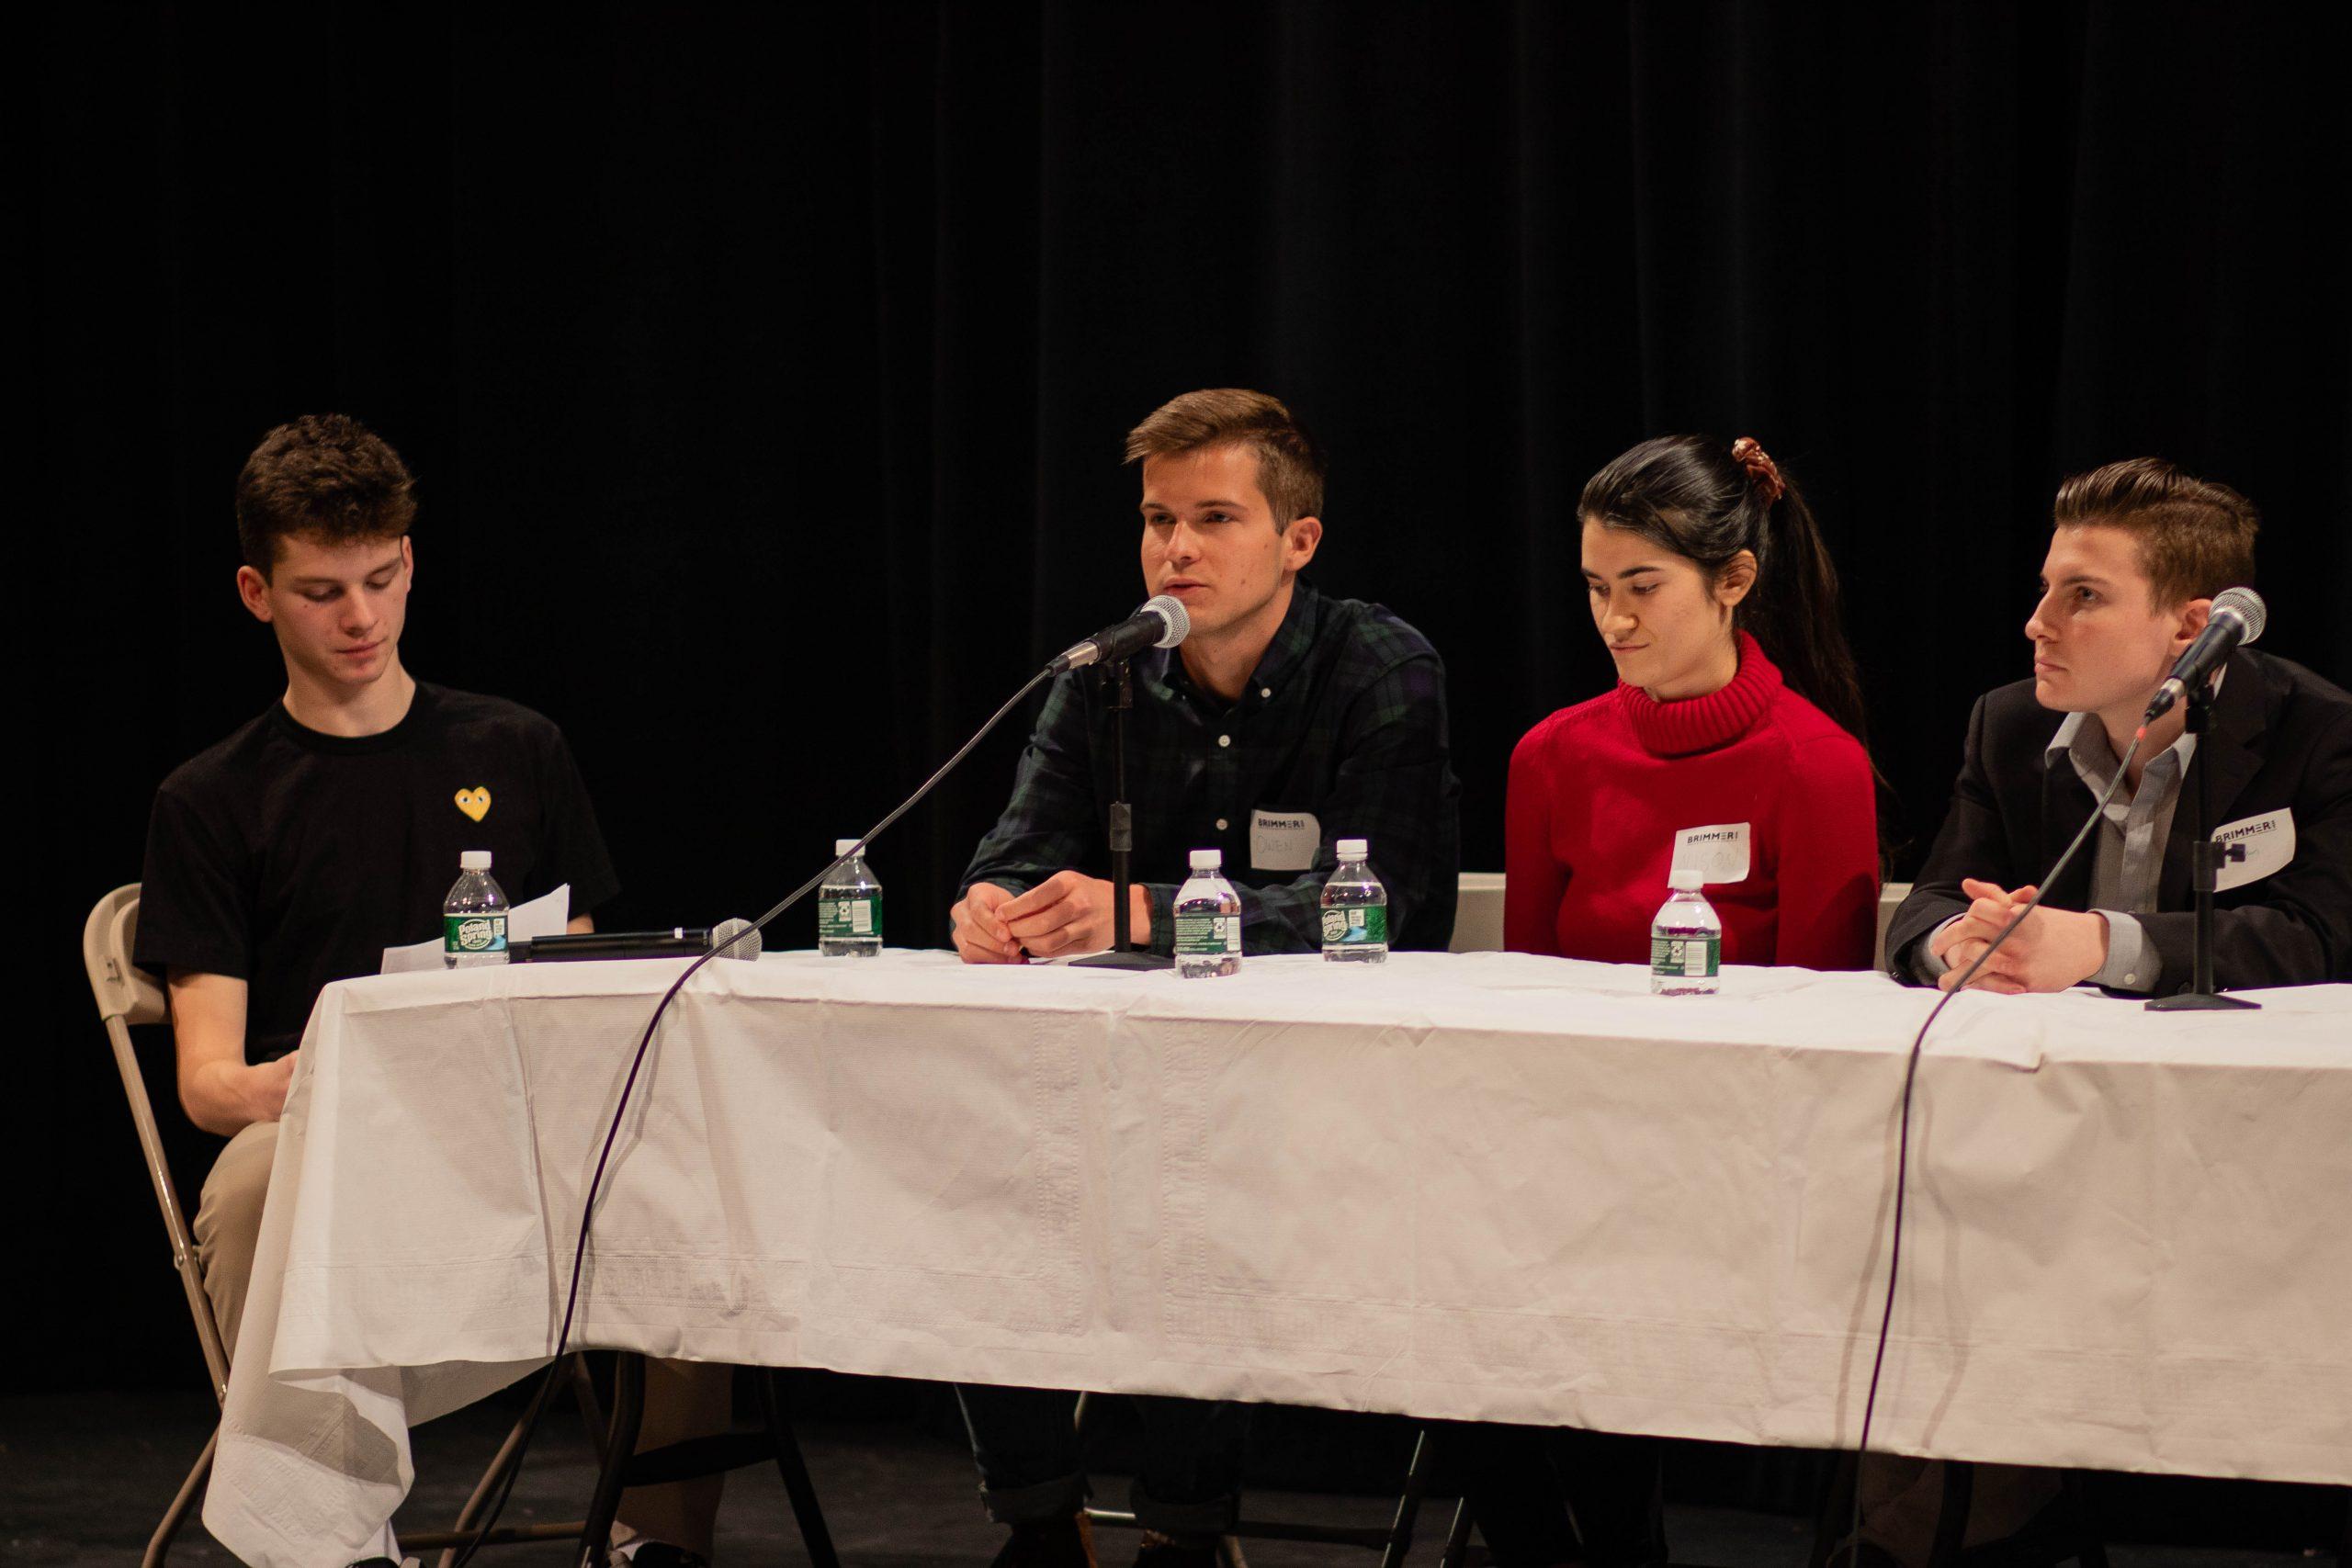 Alumni+spoke+on+a+panel+about+their+experiences+at+Brimmer.